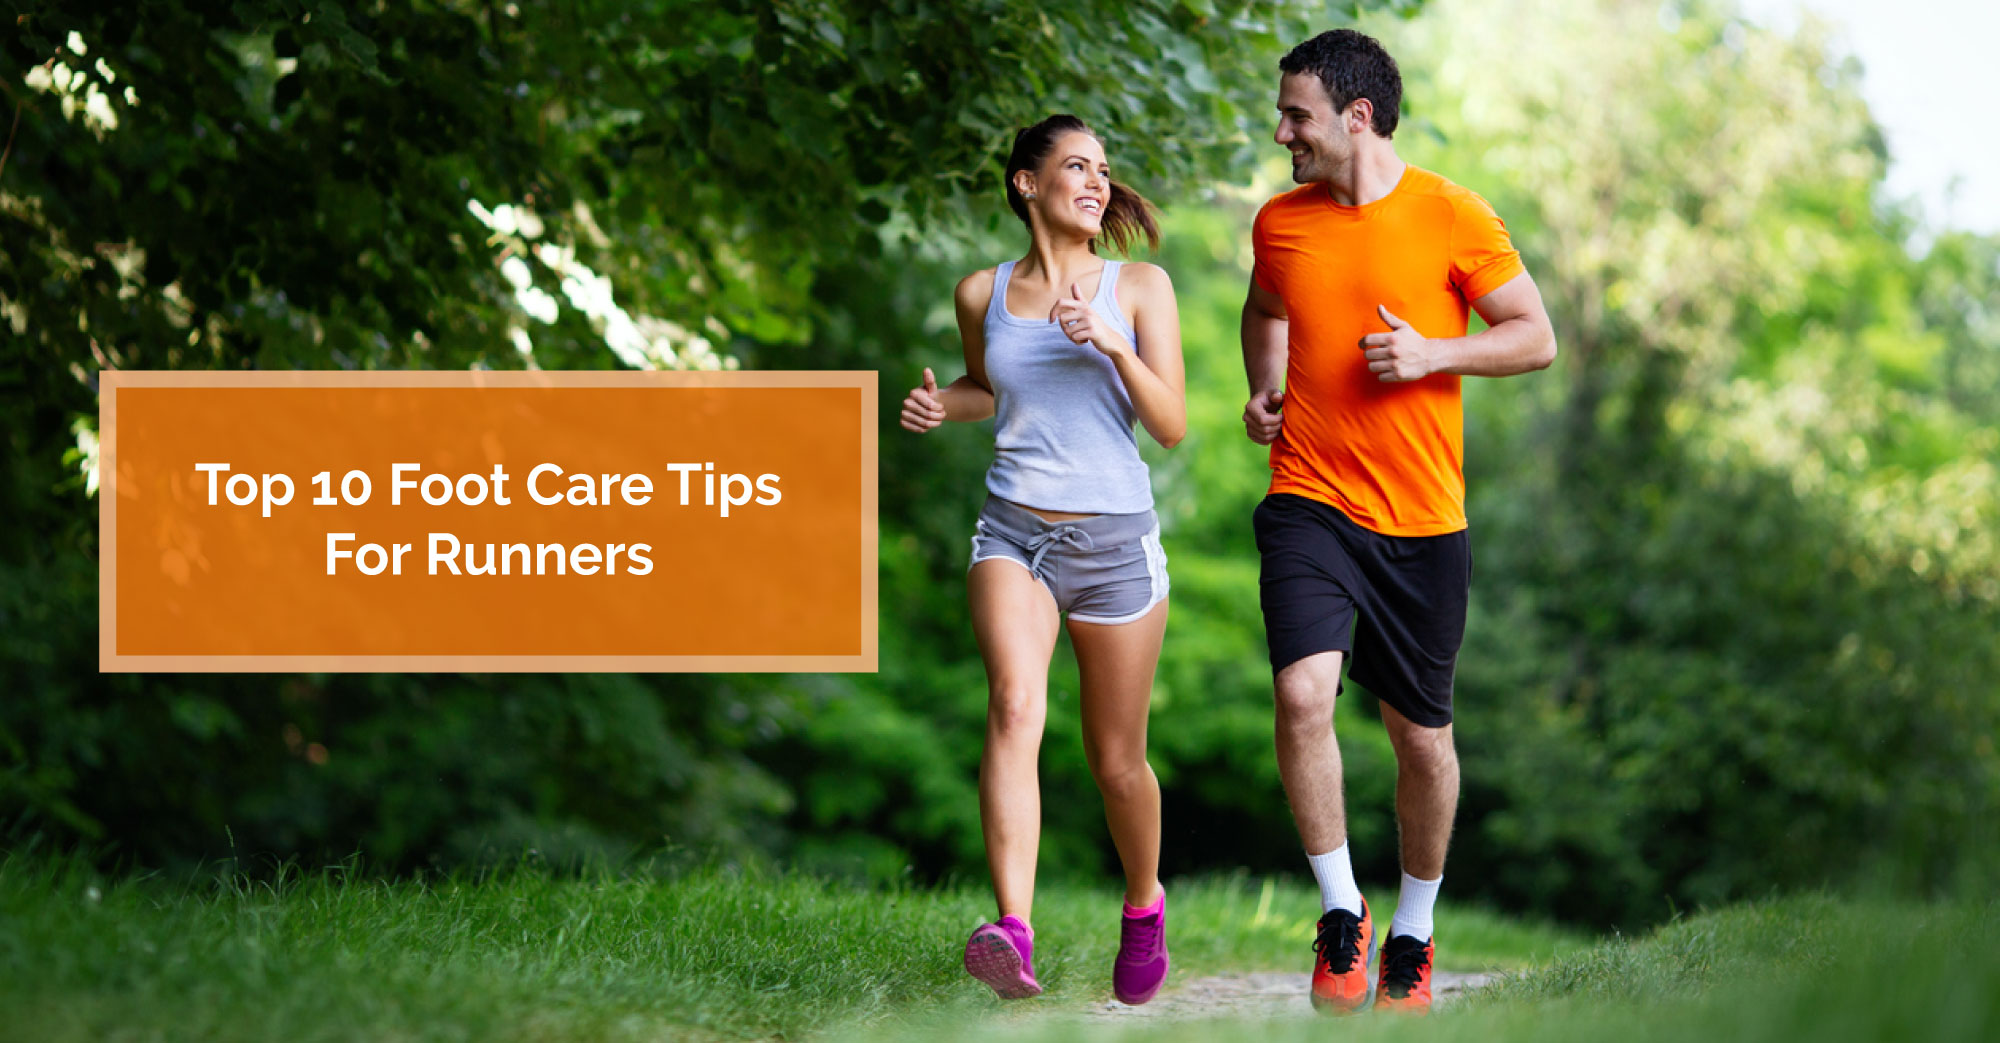 Top 10 Foot Care Tips For Runners